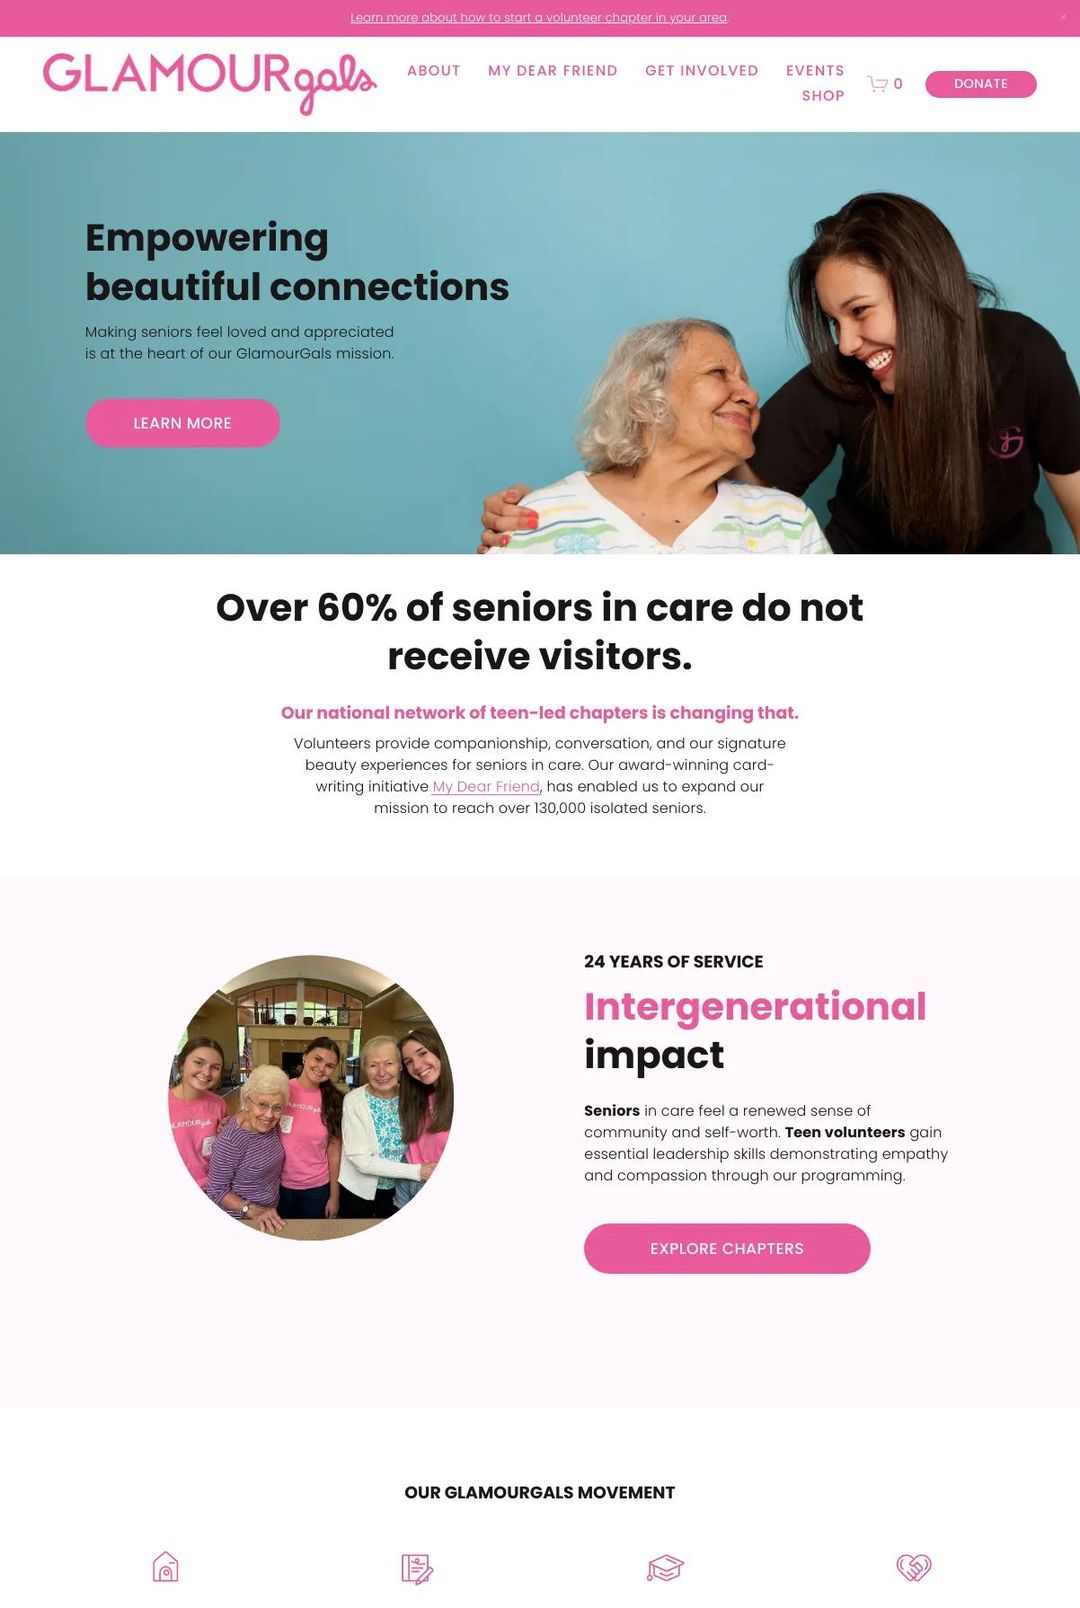 Screenshot 1 of GlamourGals Foundation (Example Squarespace Nonprofit Website)